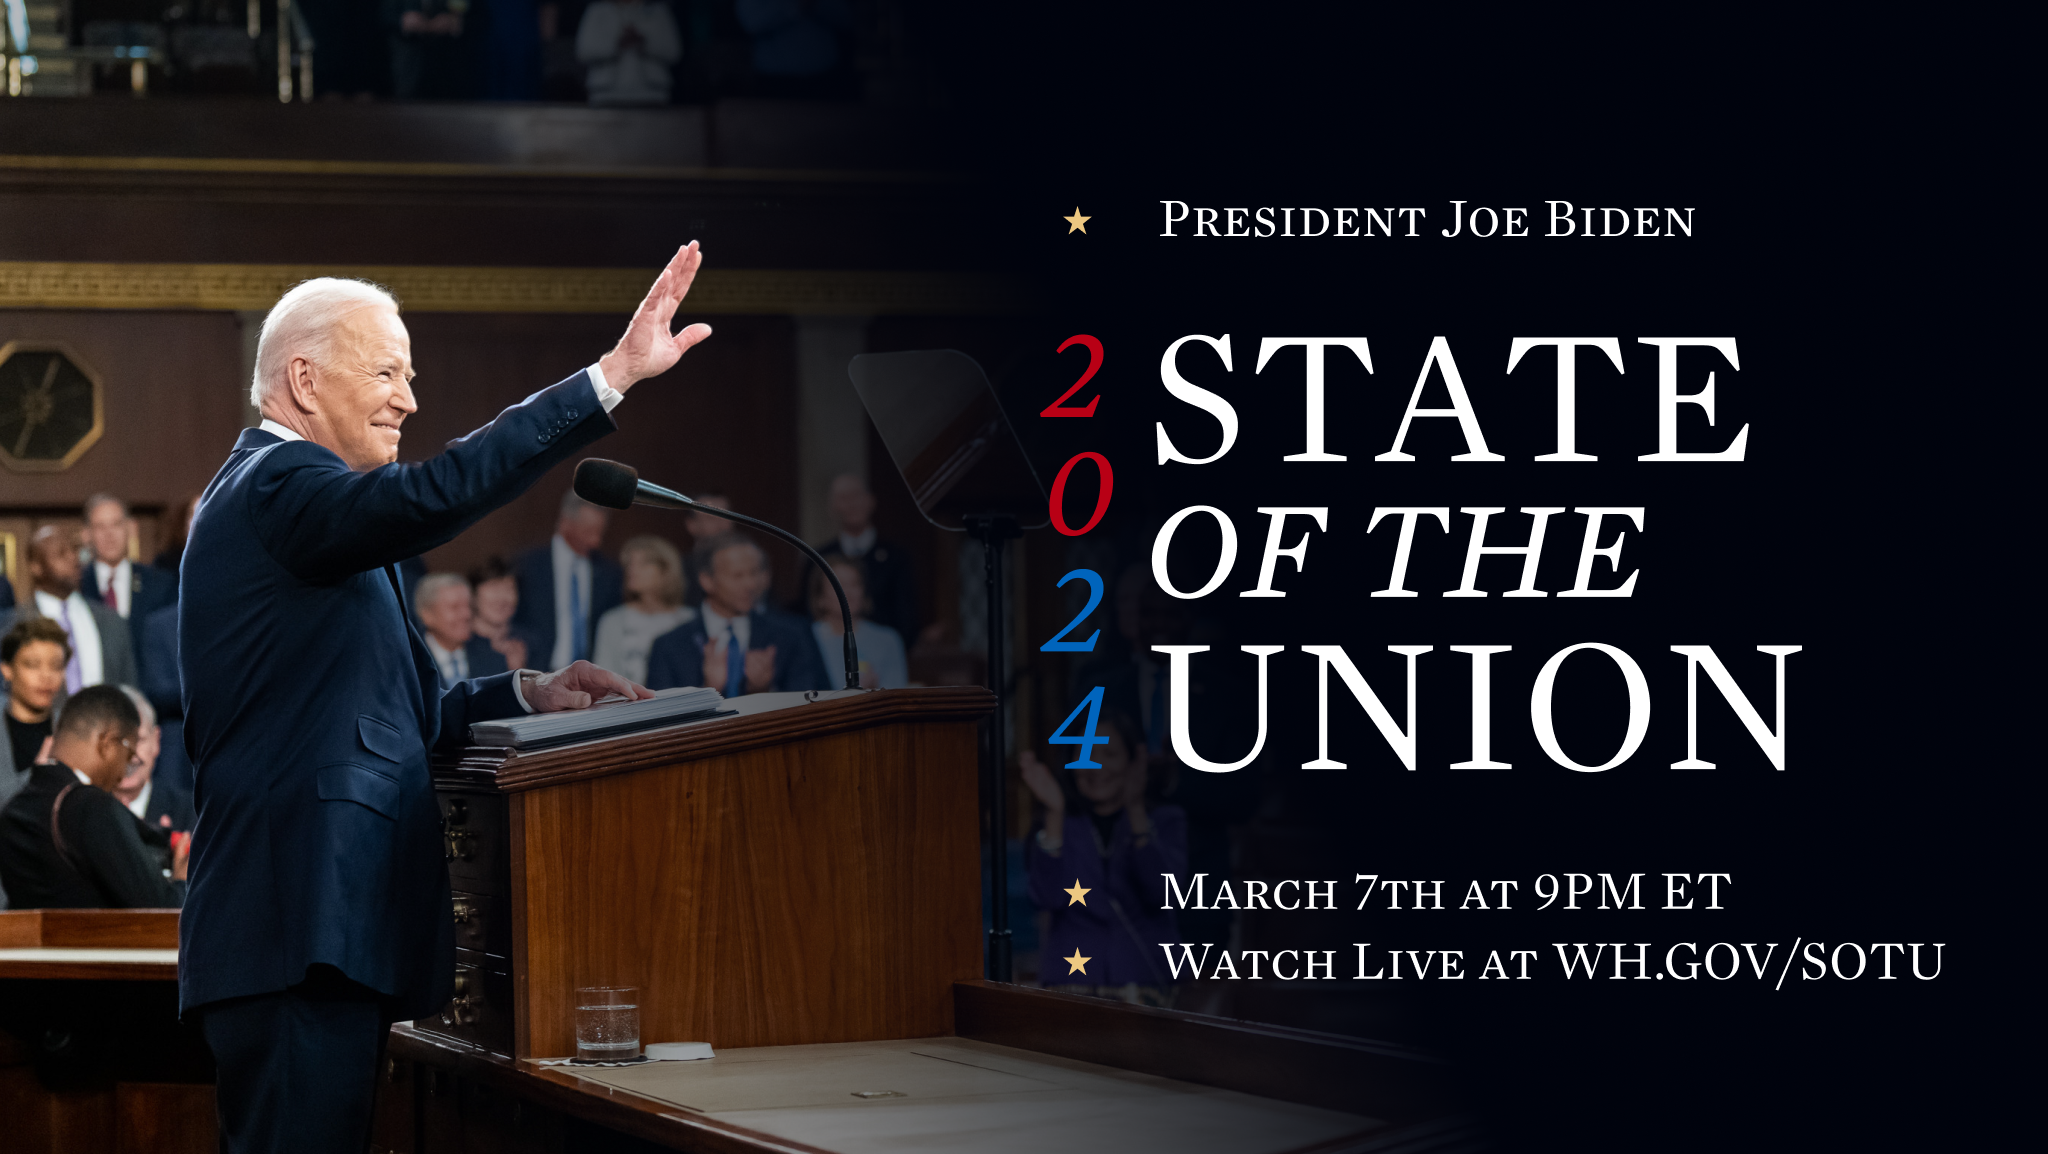 How to Watch State of the Union Without Cable